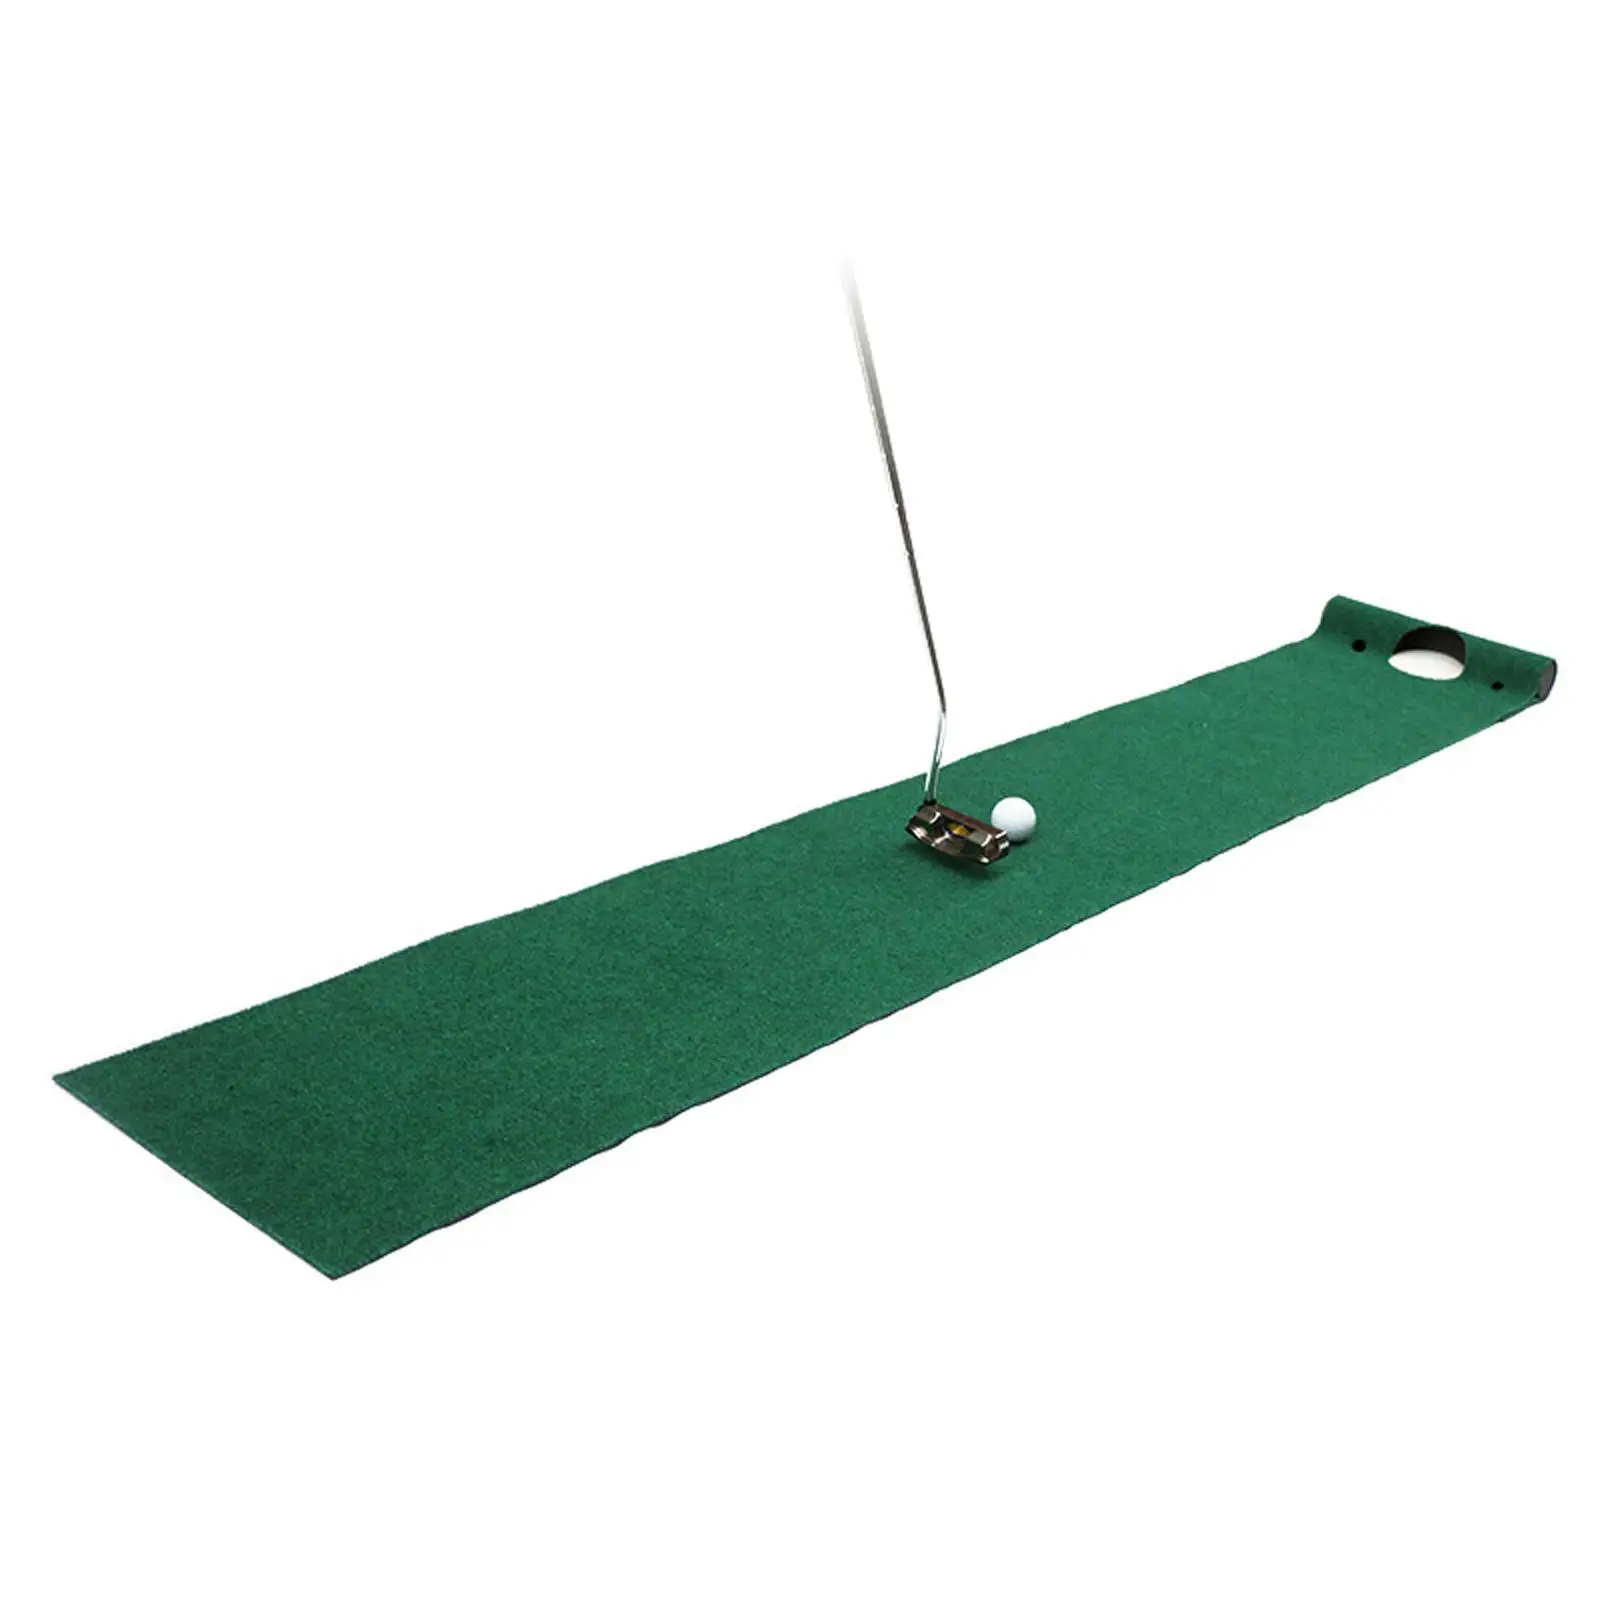 

Golf Putting Green Mat Pad Compact Sports Men Women Practice Golf Training Aid Putting Green for Backyard Exercise Outdoor